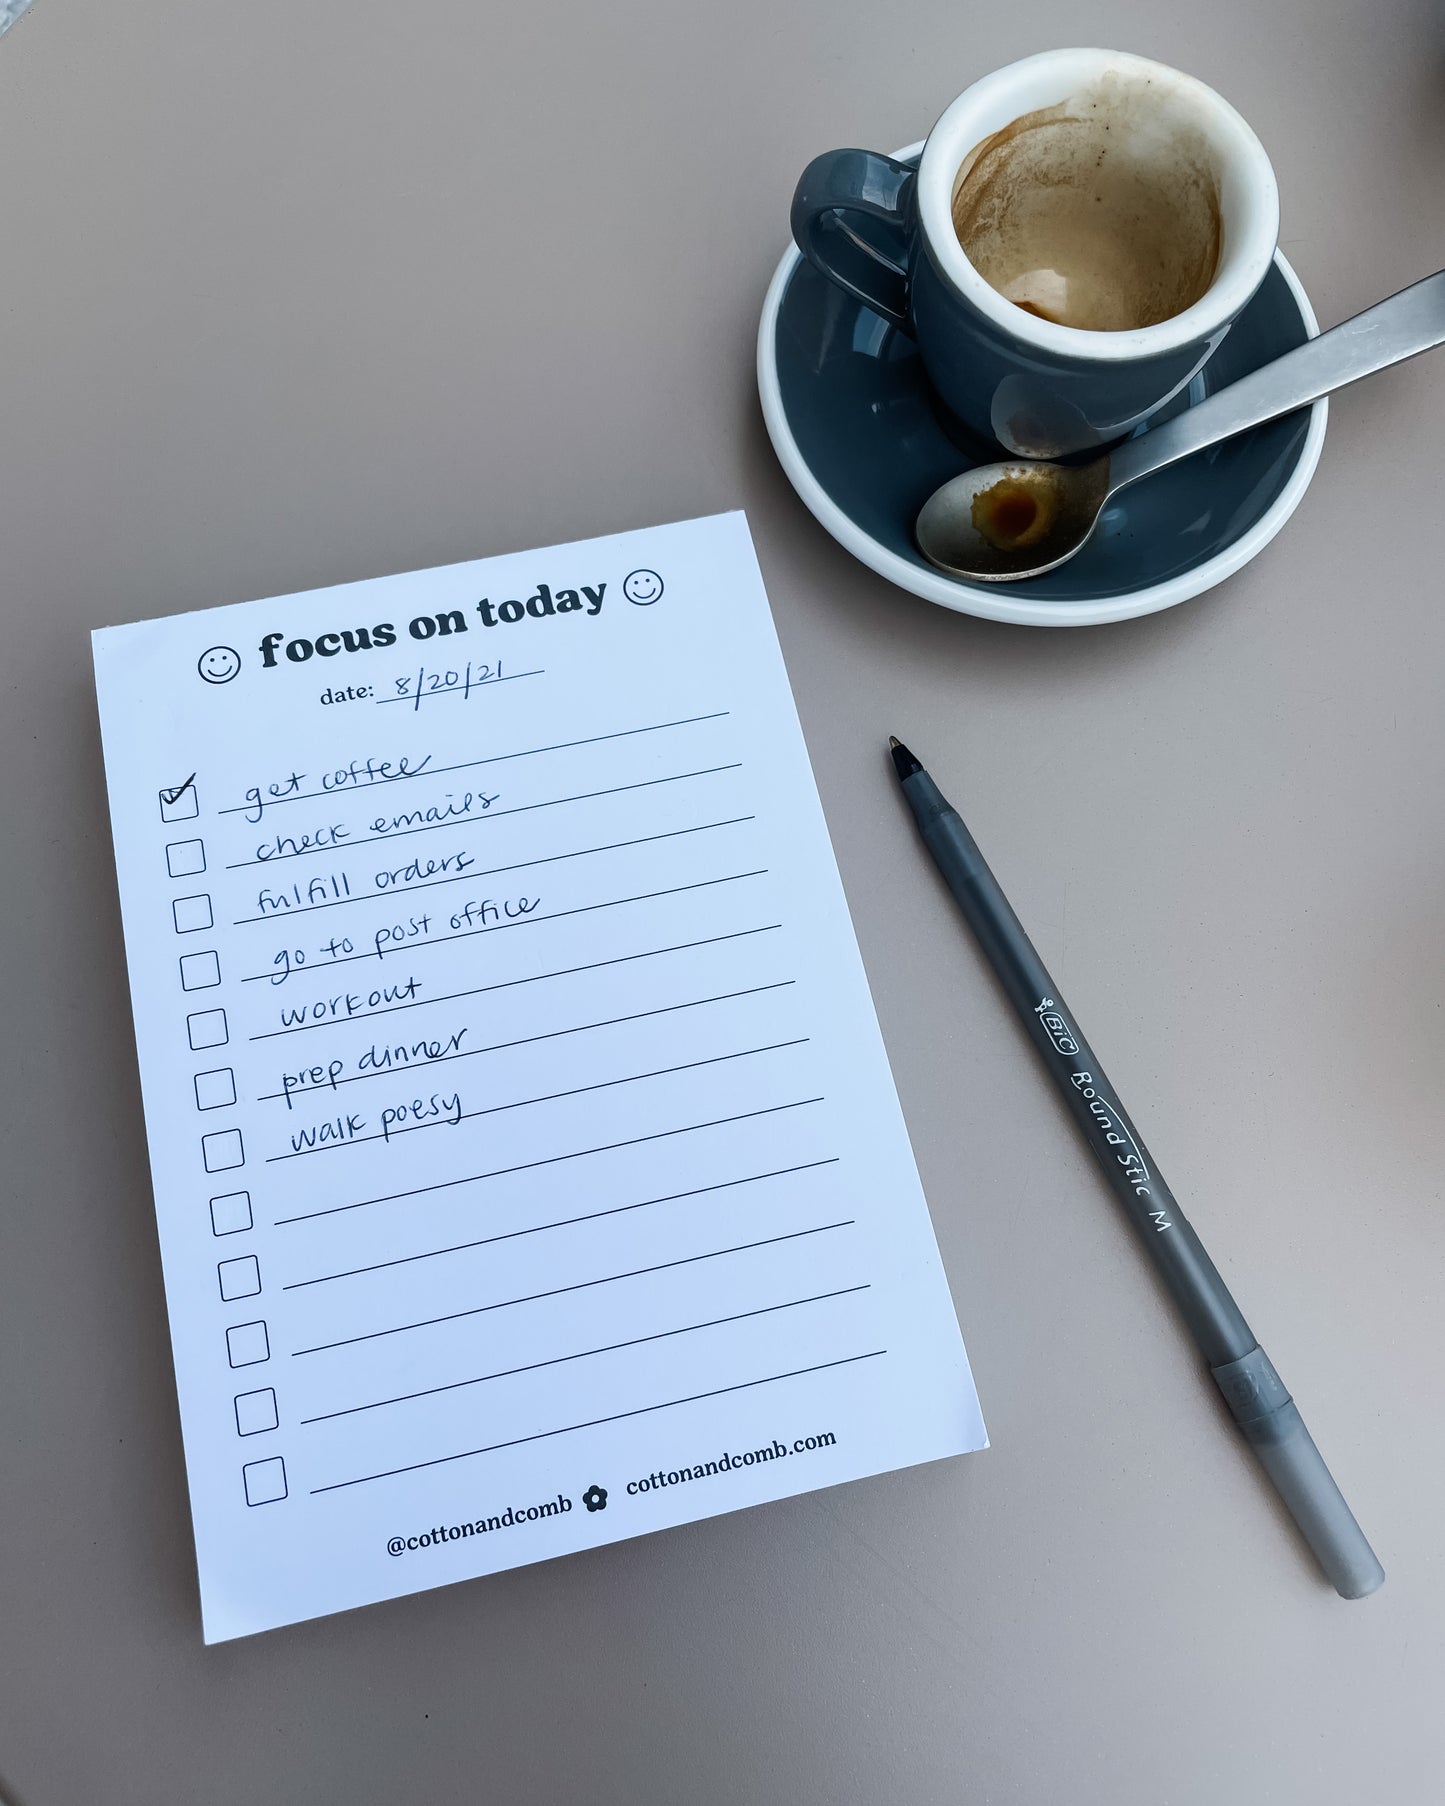 "Focus on Today" To-Do List Notepad